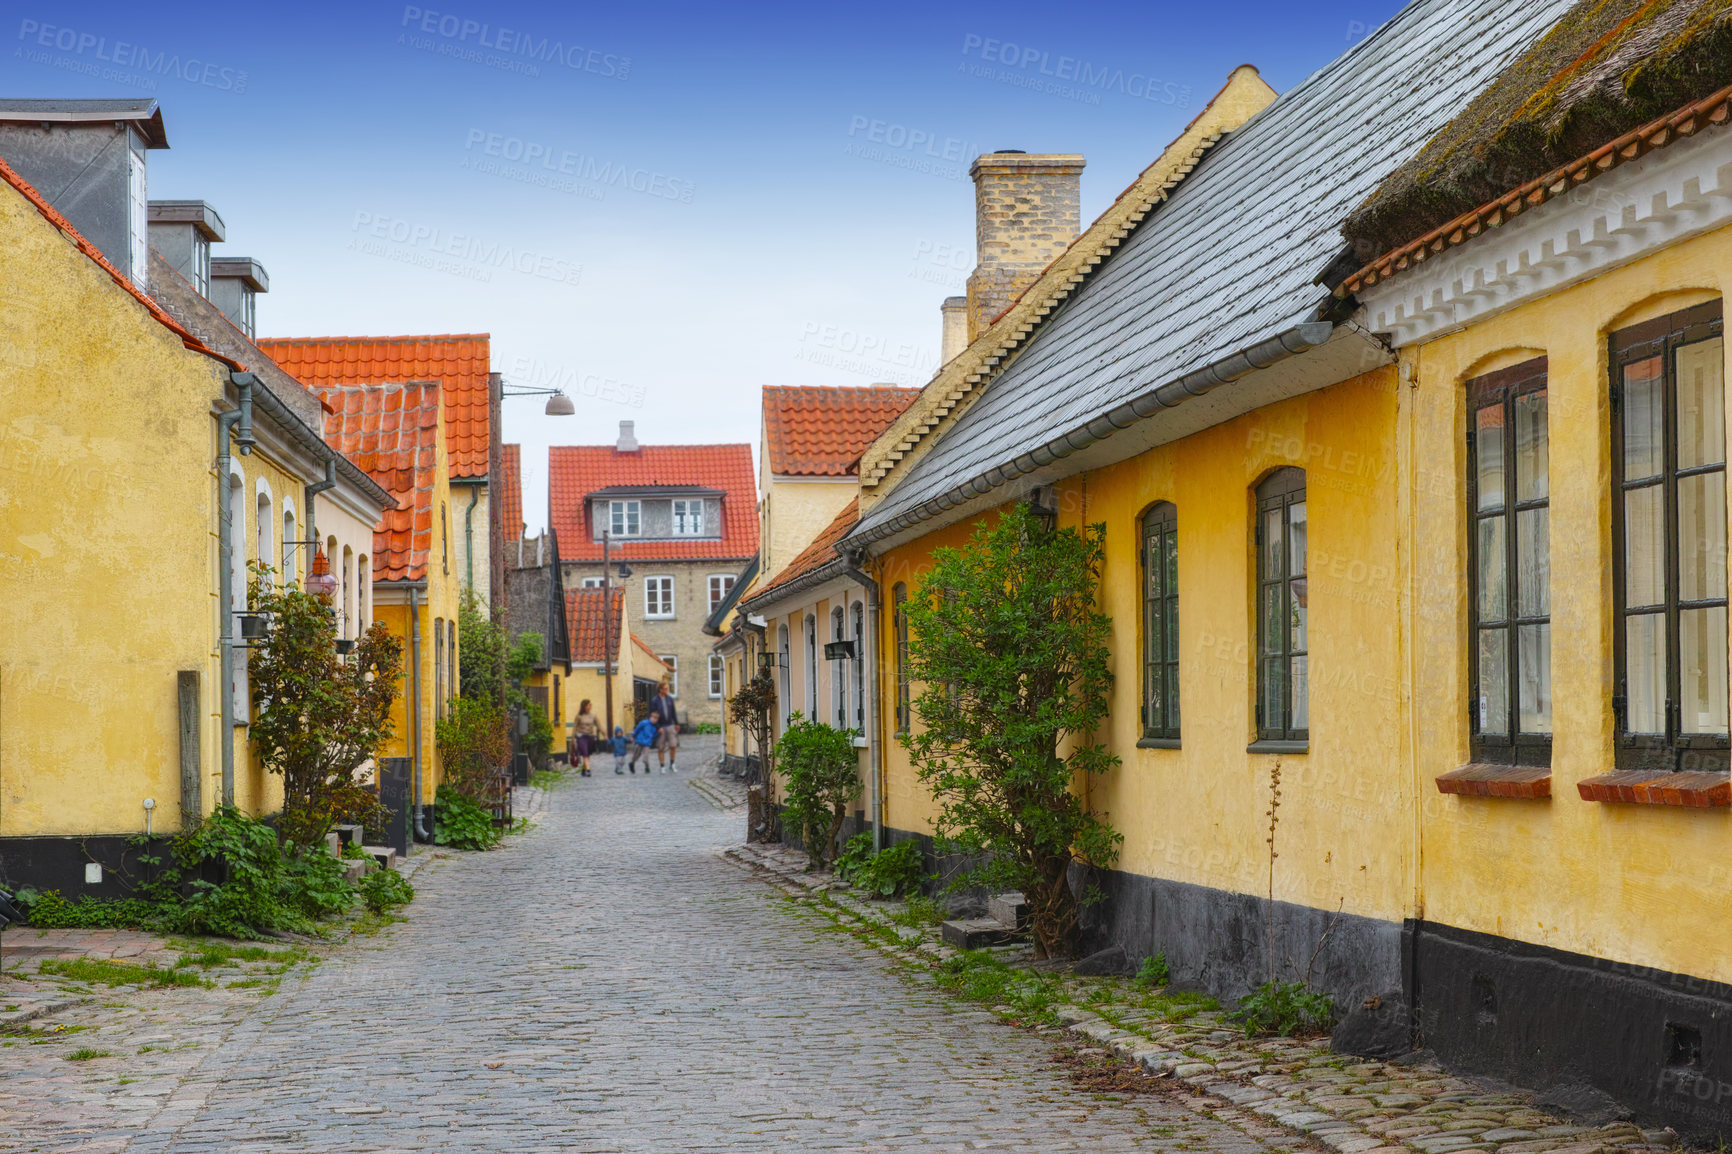 Buy stock photo Old yellow houses located in Dragoer, Denmark. Tiny ancient houses in historical city. Alleys with yellow painted houses, red roofs, and cobblestone streets built in the traditional Danish style 